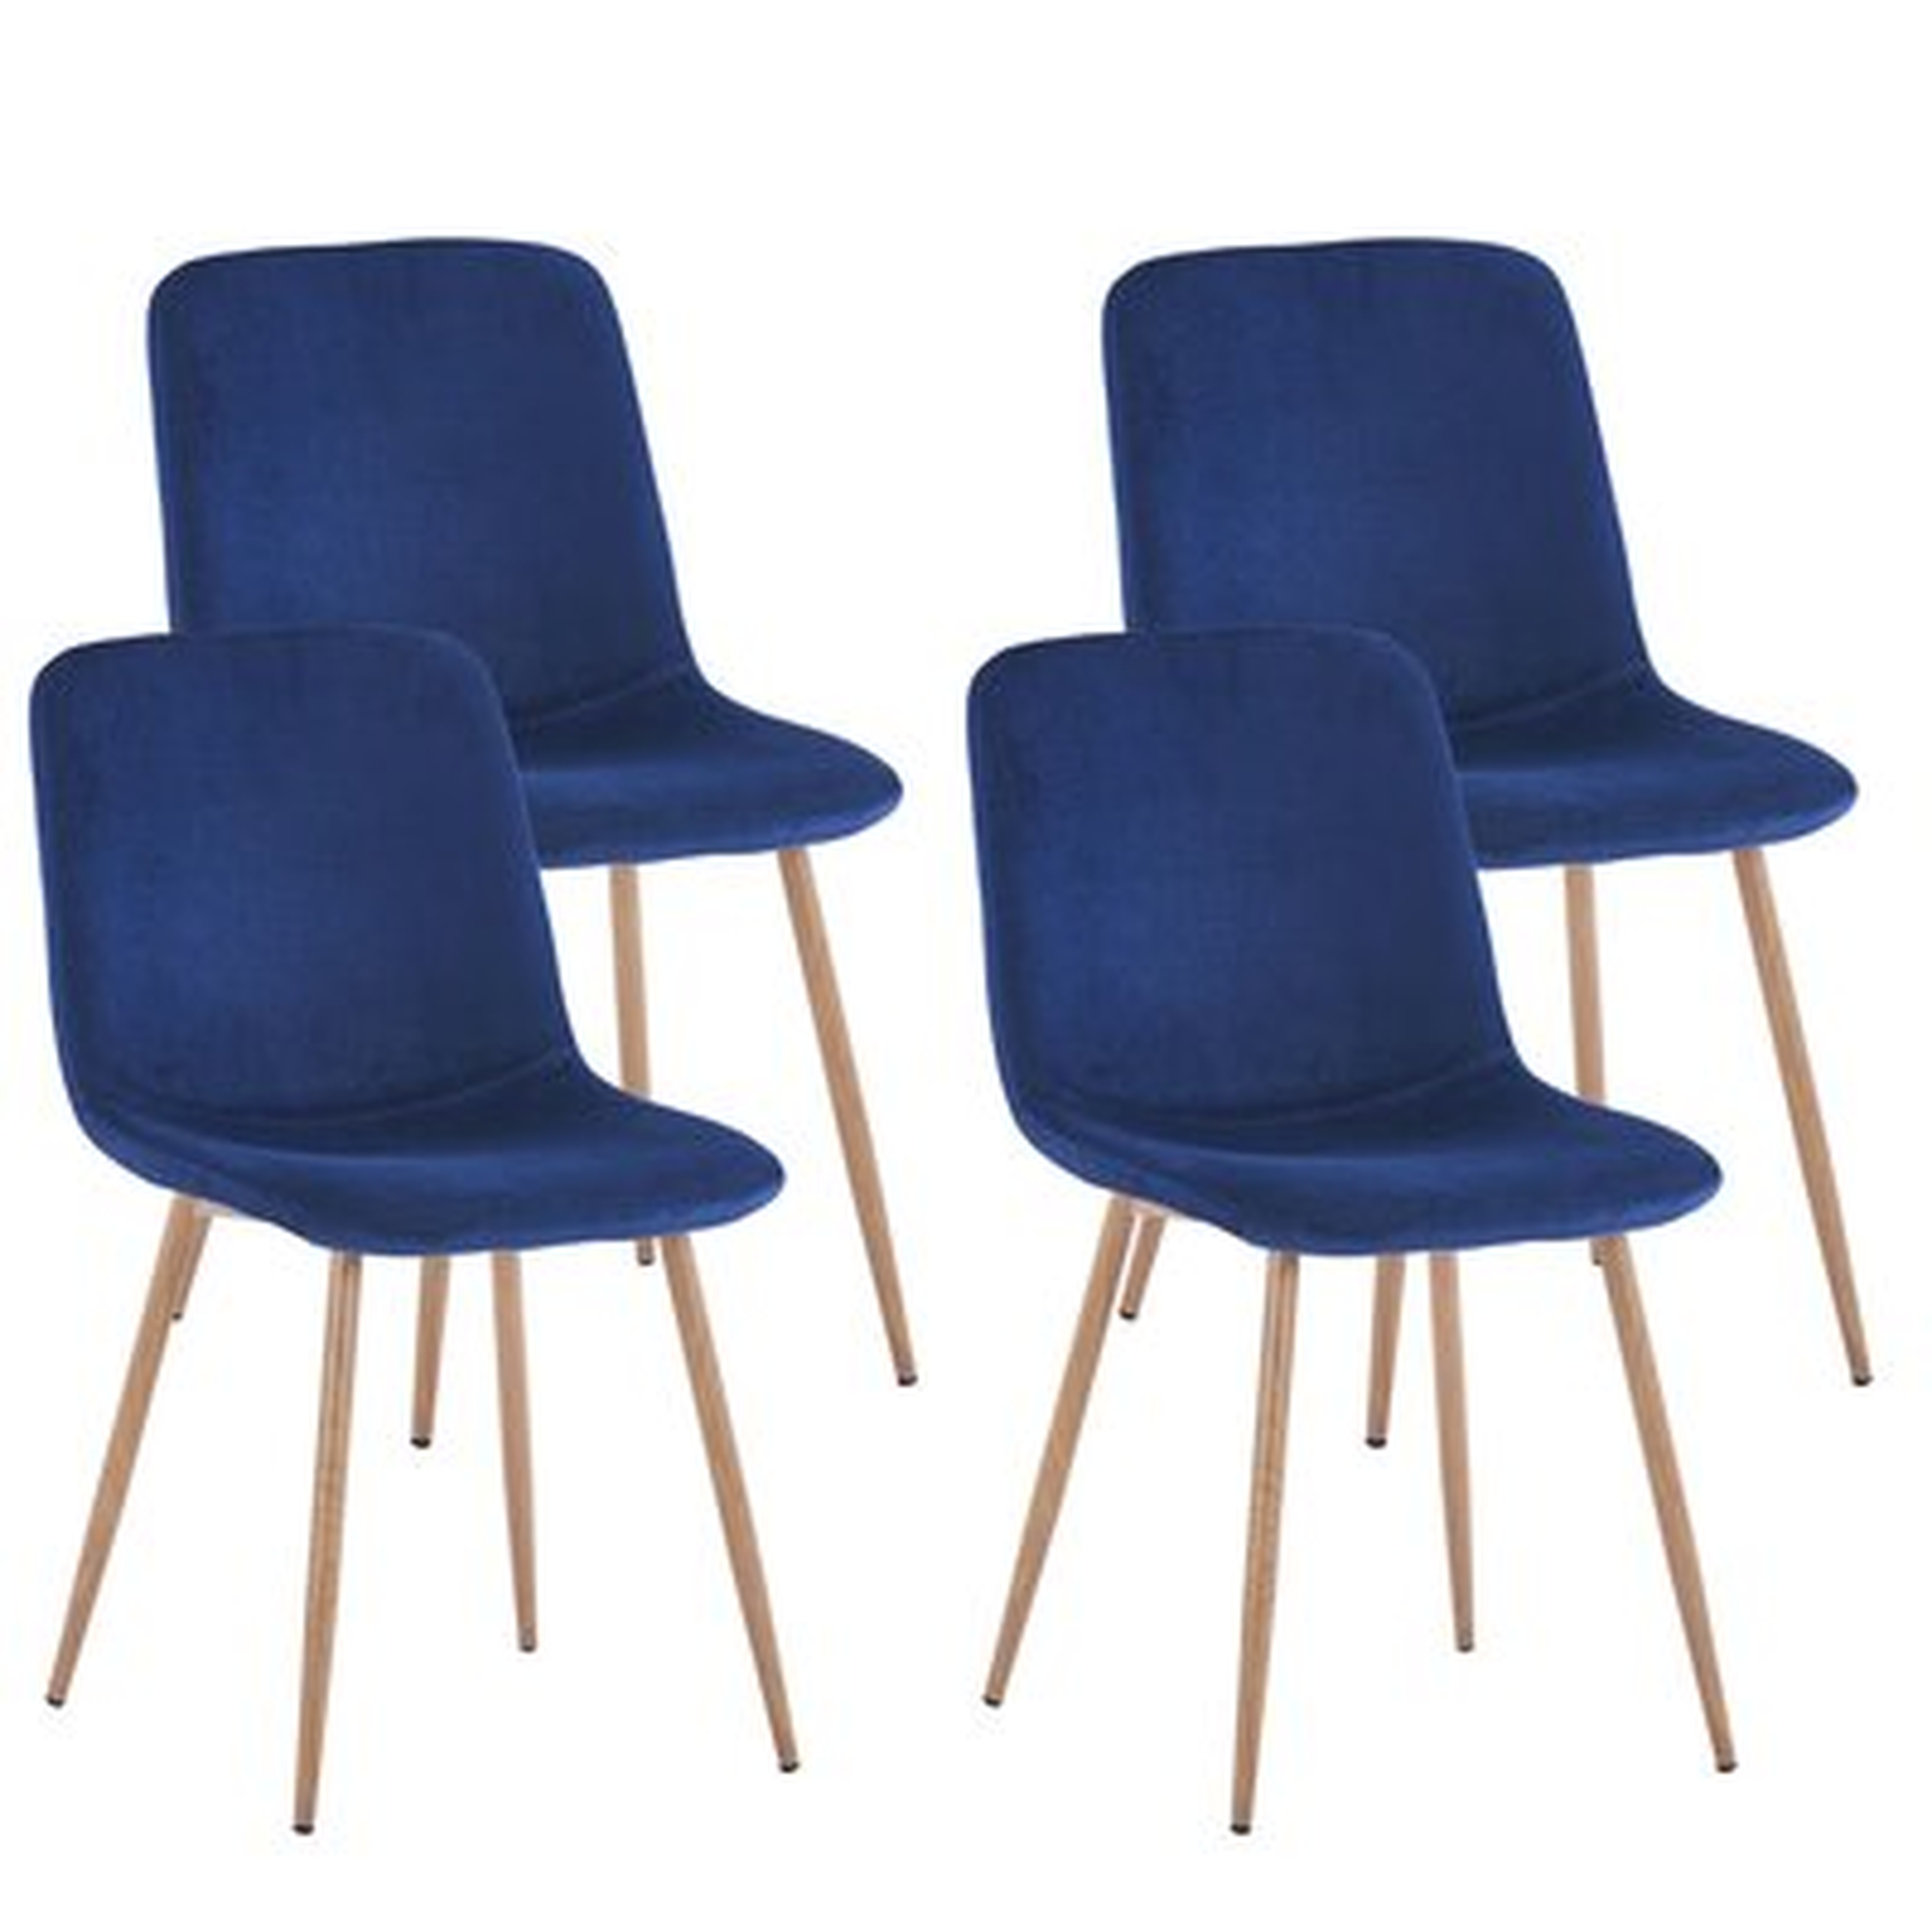 Dining Chair 4PCS(BLUE),Modern Style,New Technology,Suitable For Restaurants, Cafes, Taverns, Offices, Living Rooms, Reception Rooms.Simple Structure, Easy Installation. - Wayfair